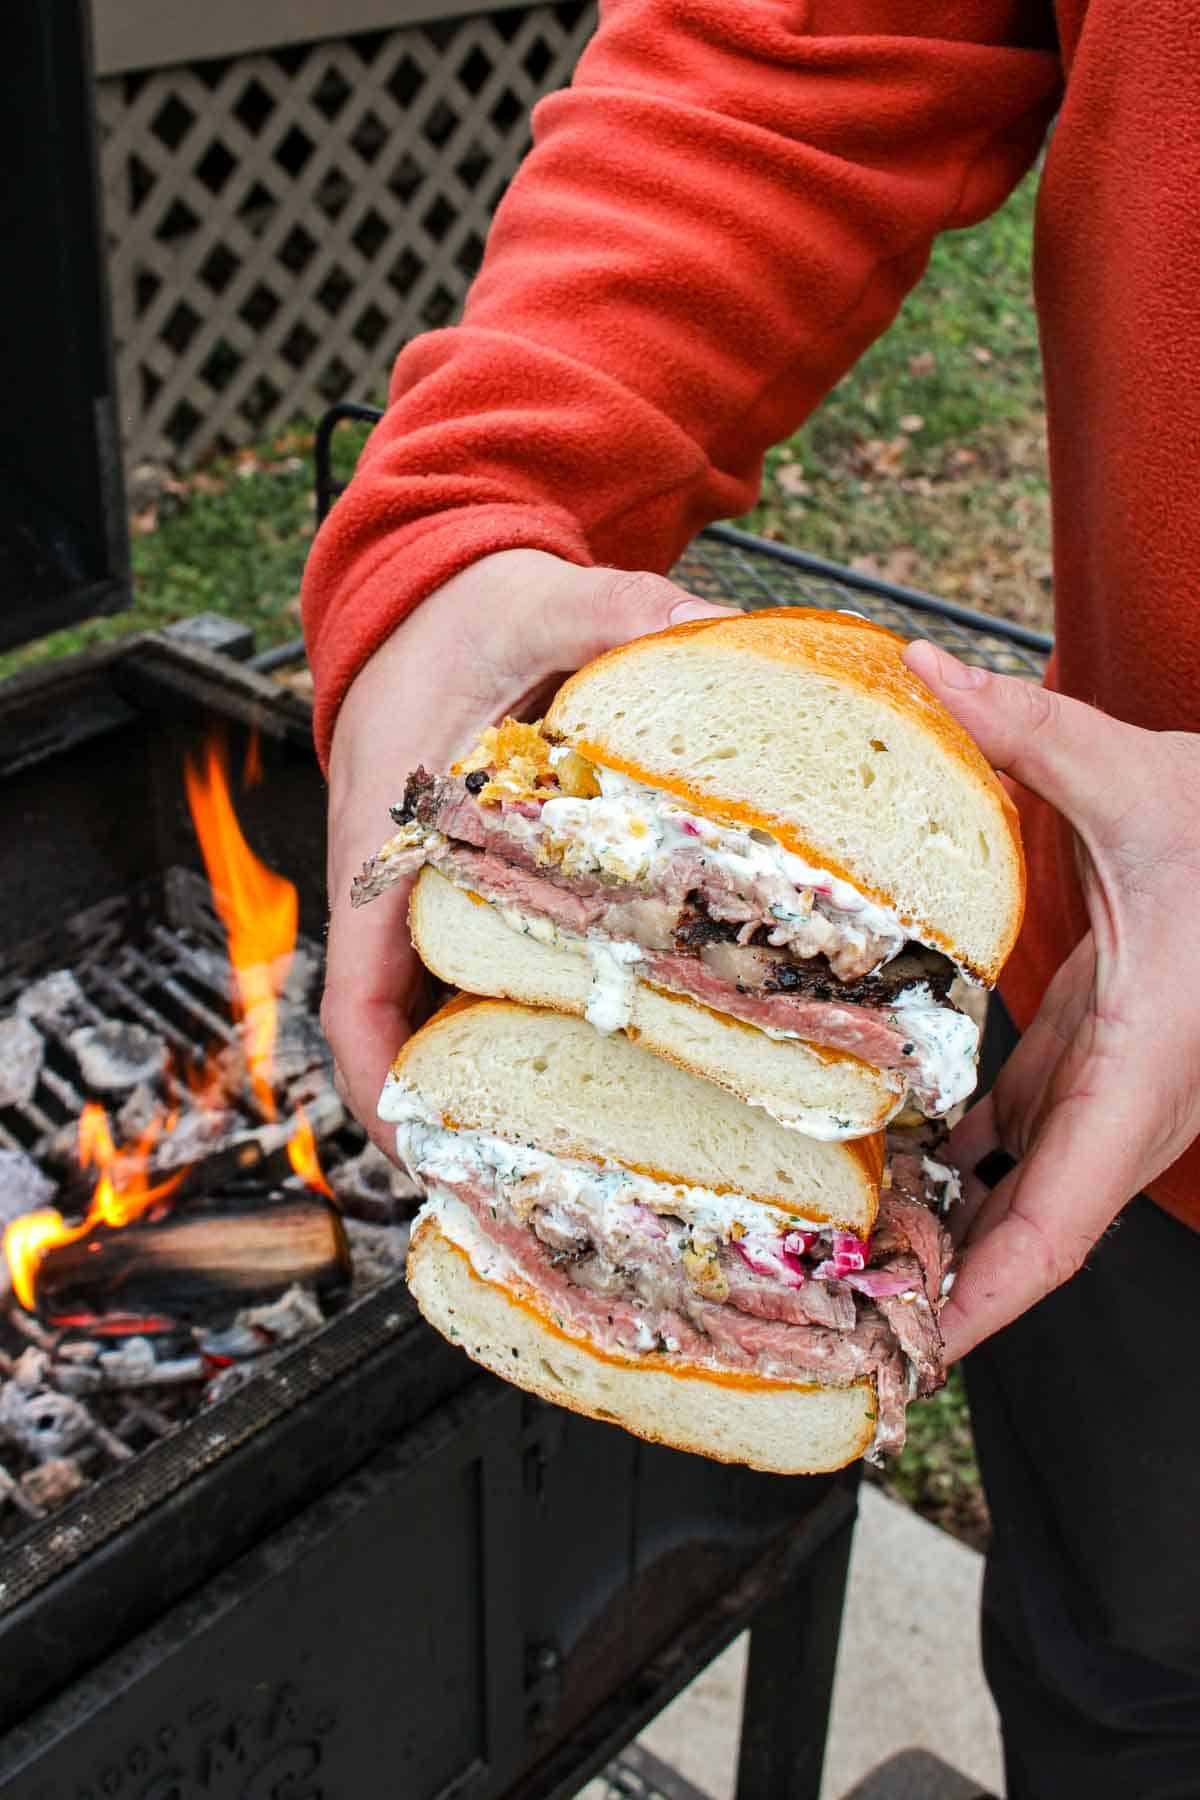 The steak sandwich cut in half, oozing with juicy flavor and textures. 